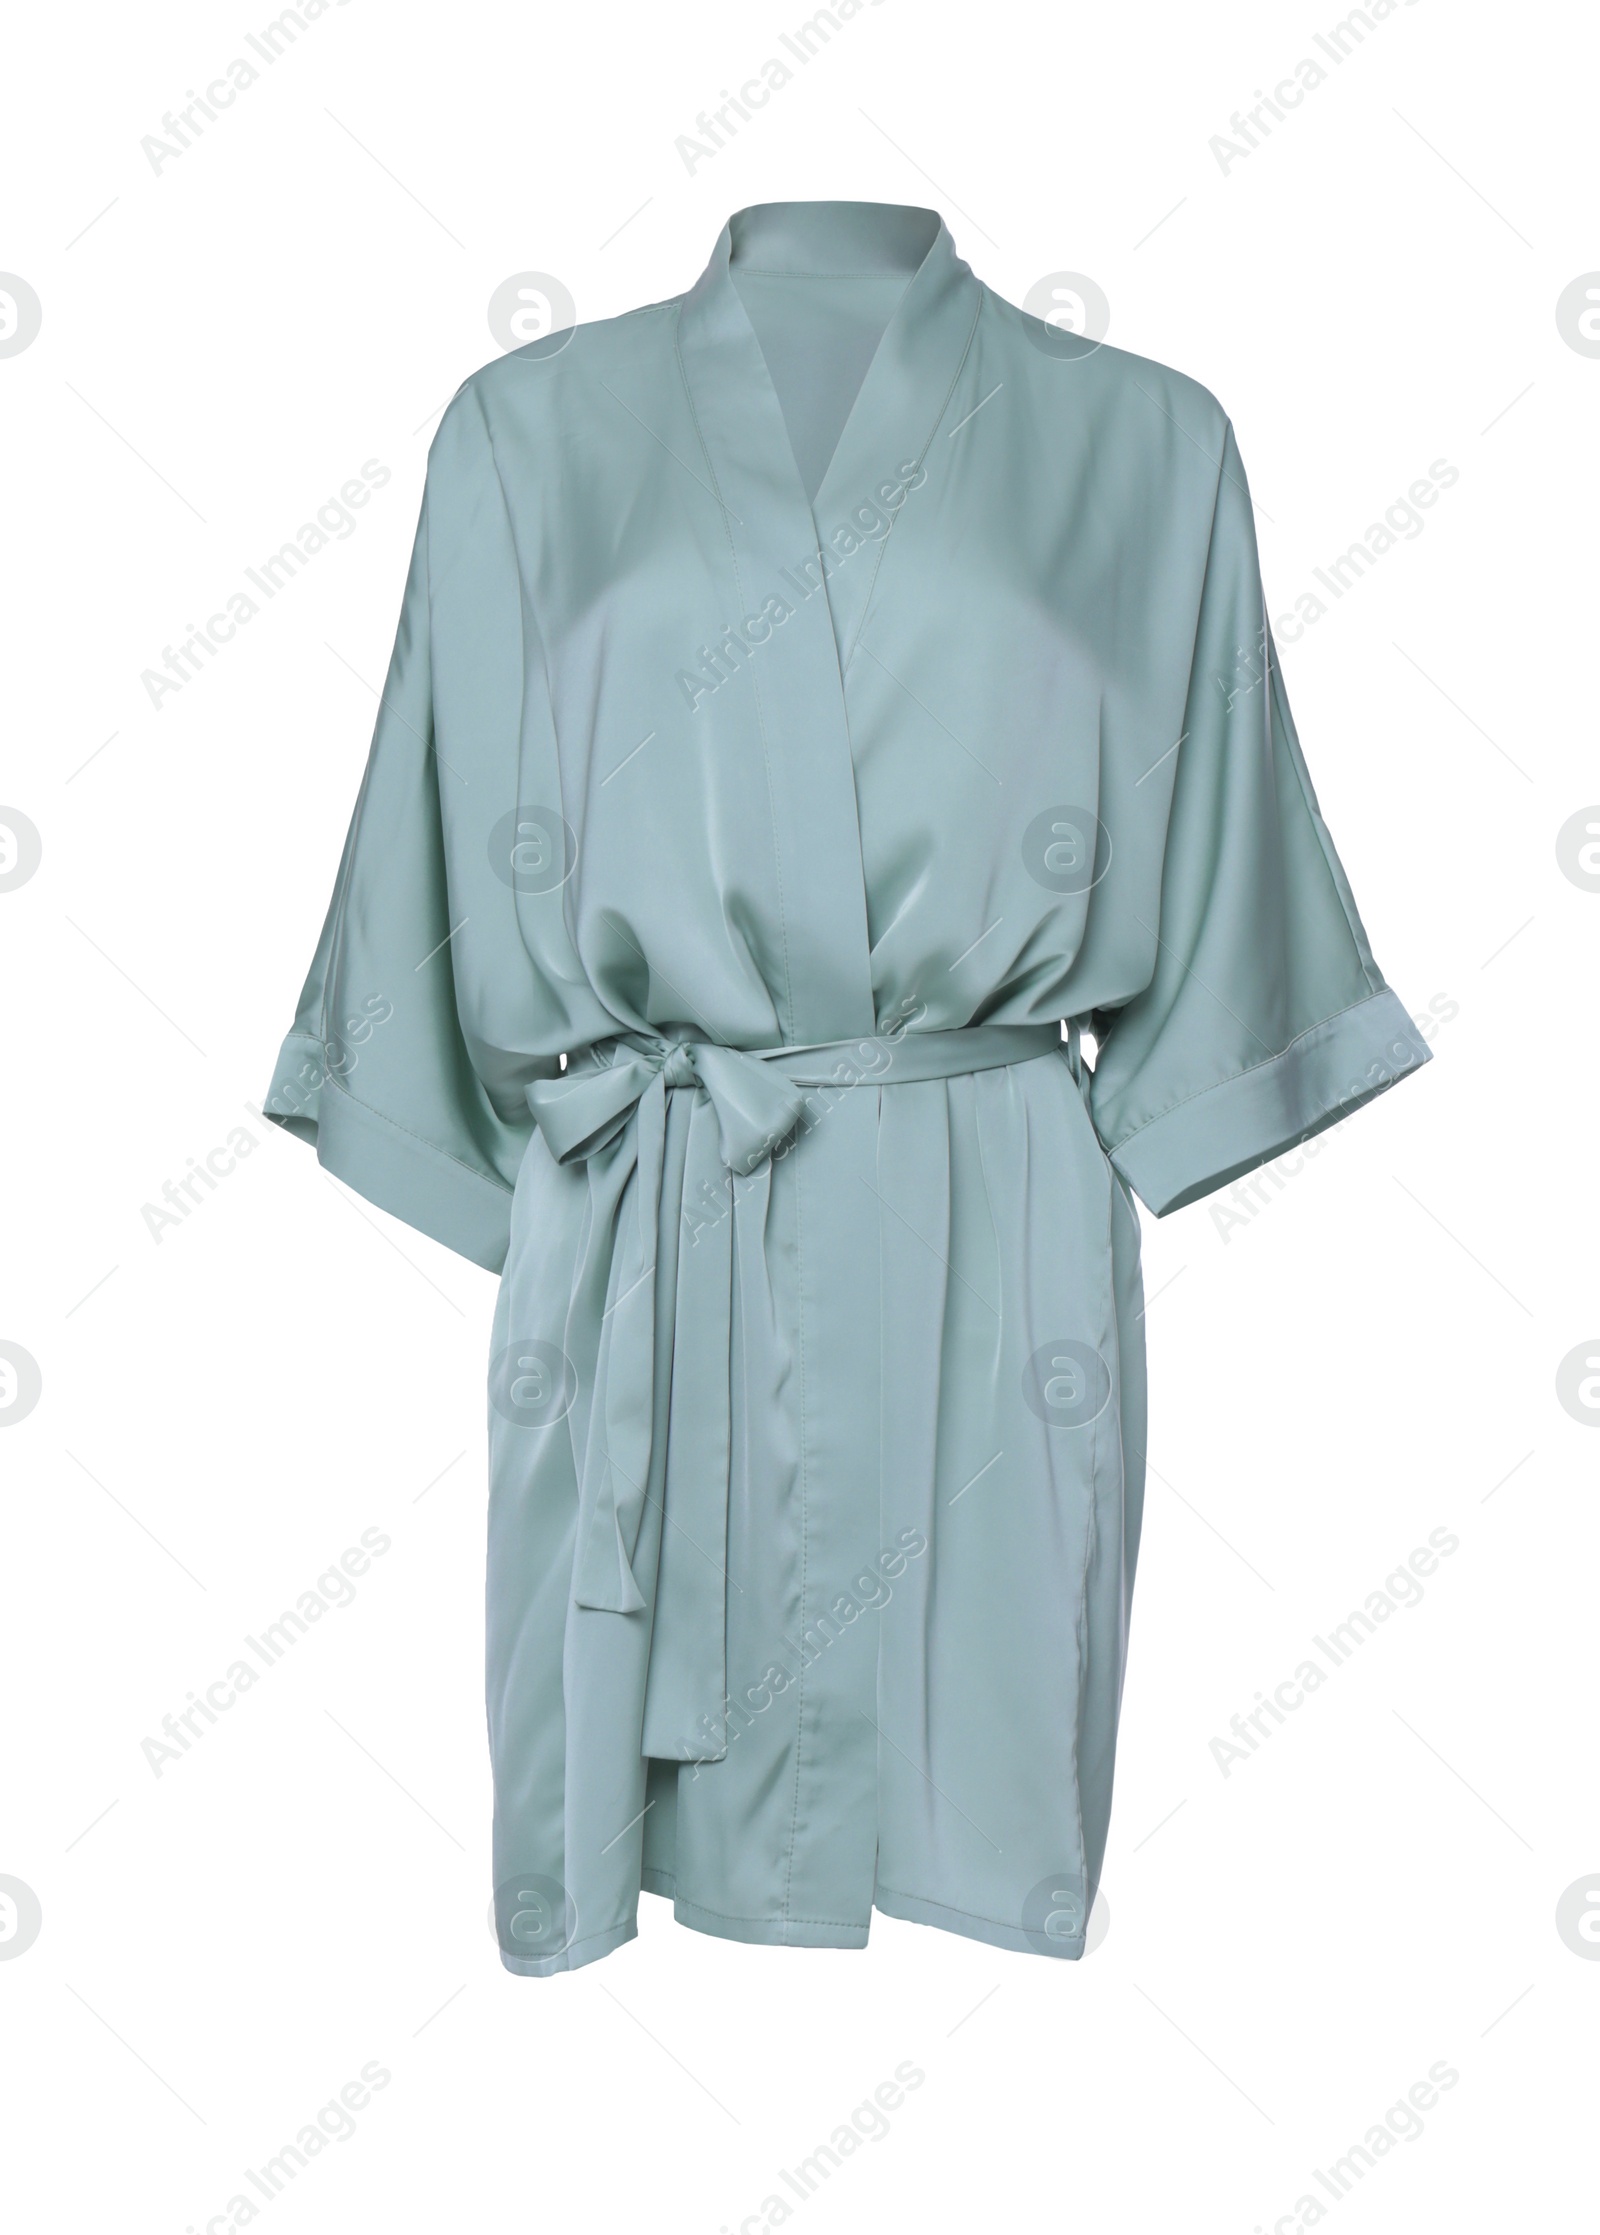 Image of Pale green silk bathrobe isolated on white